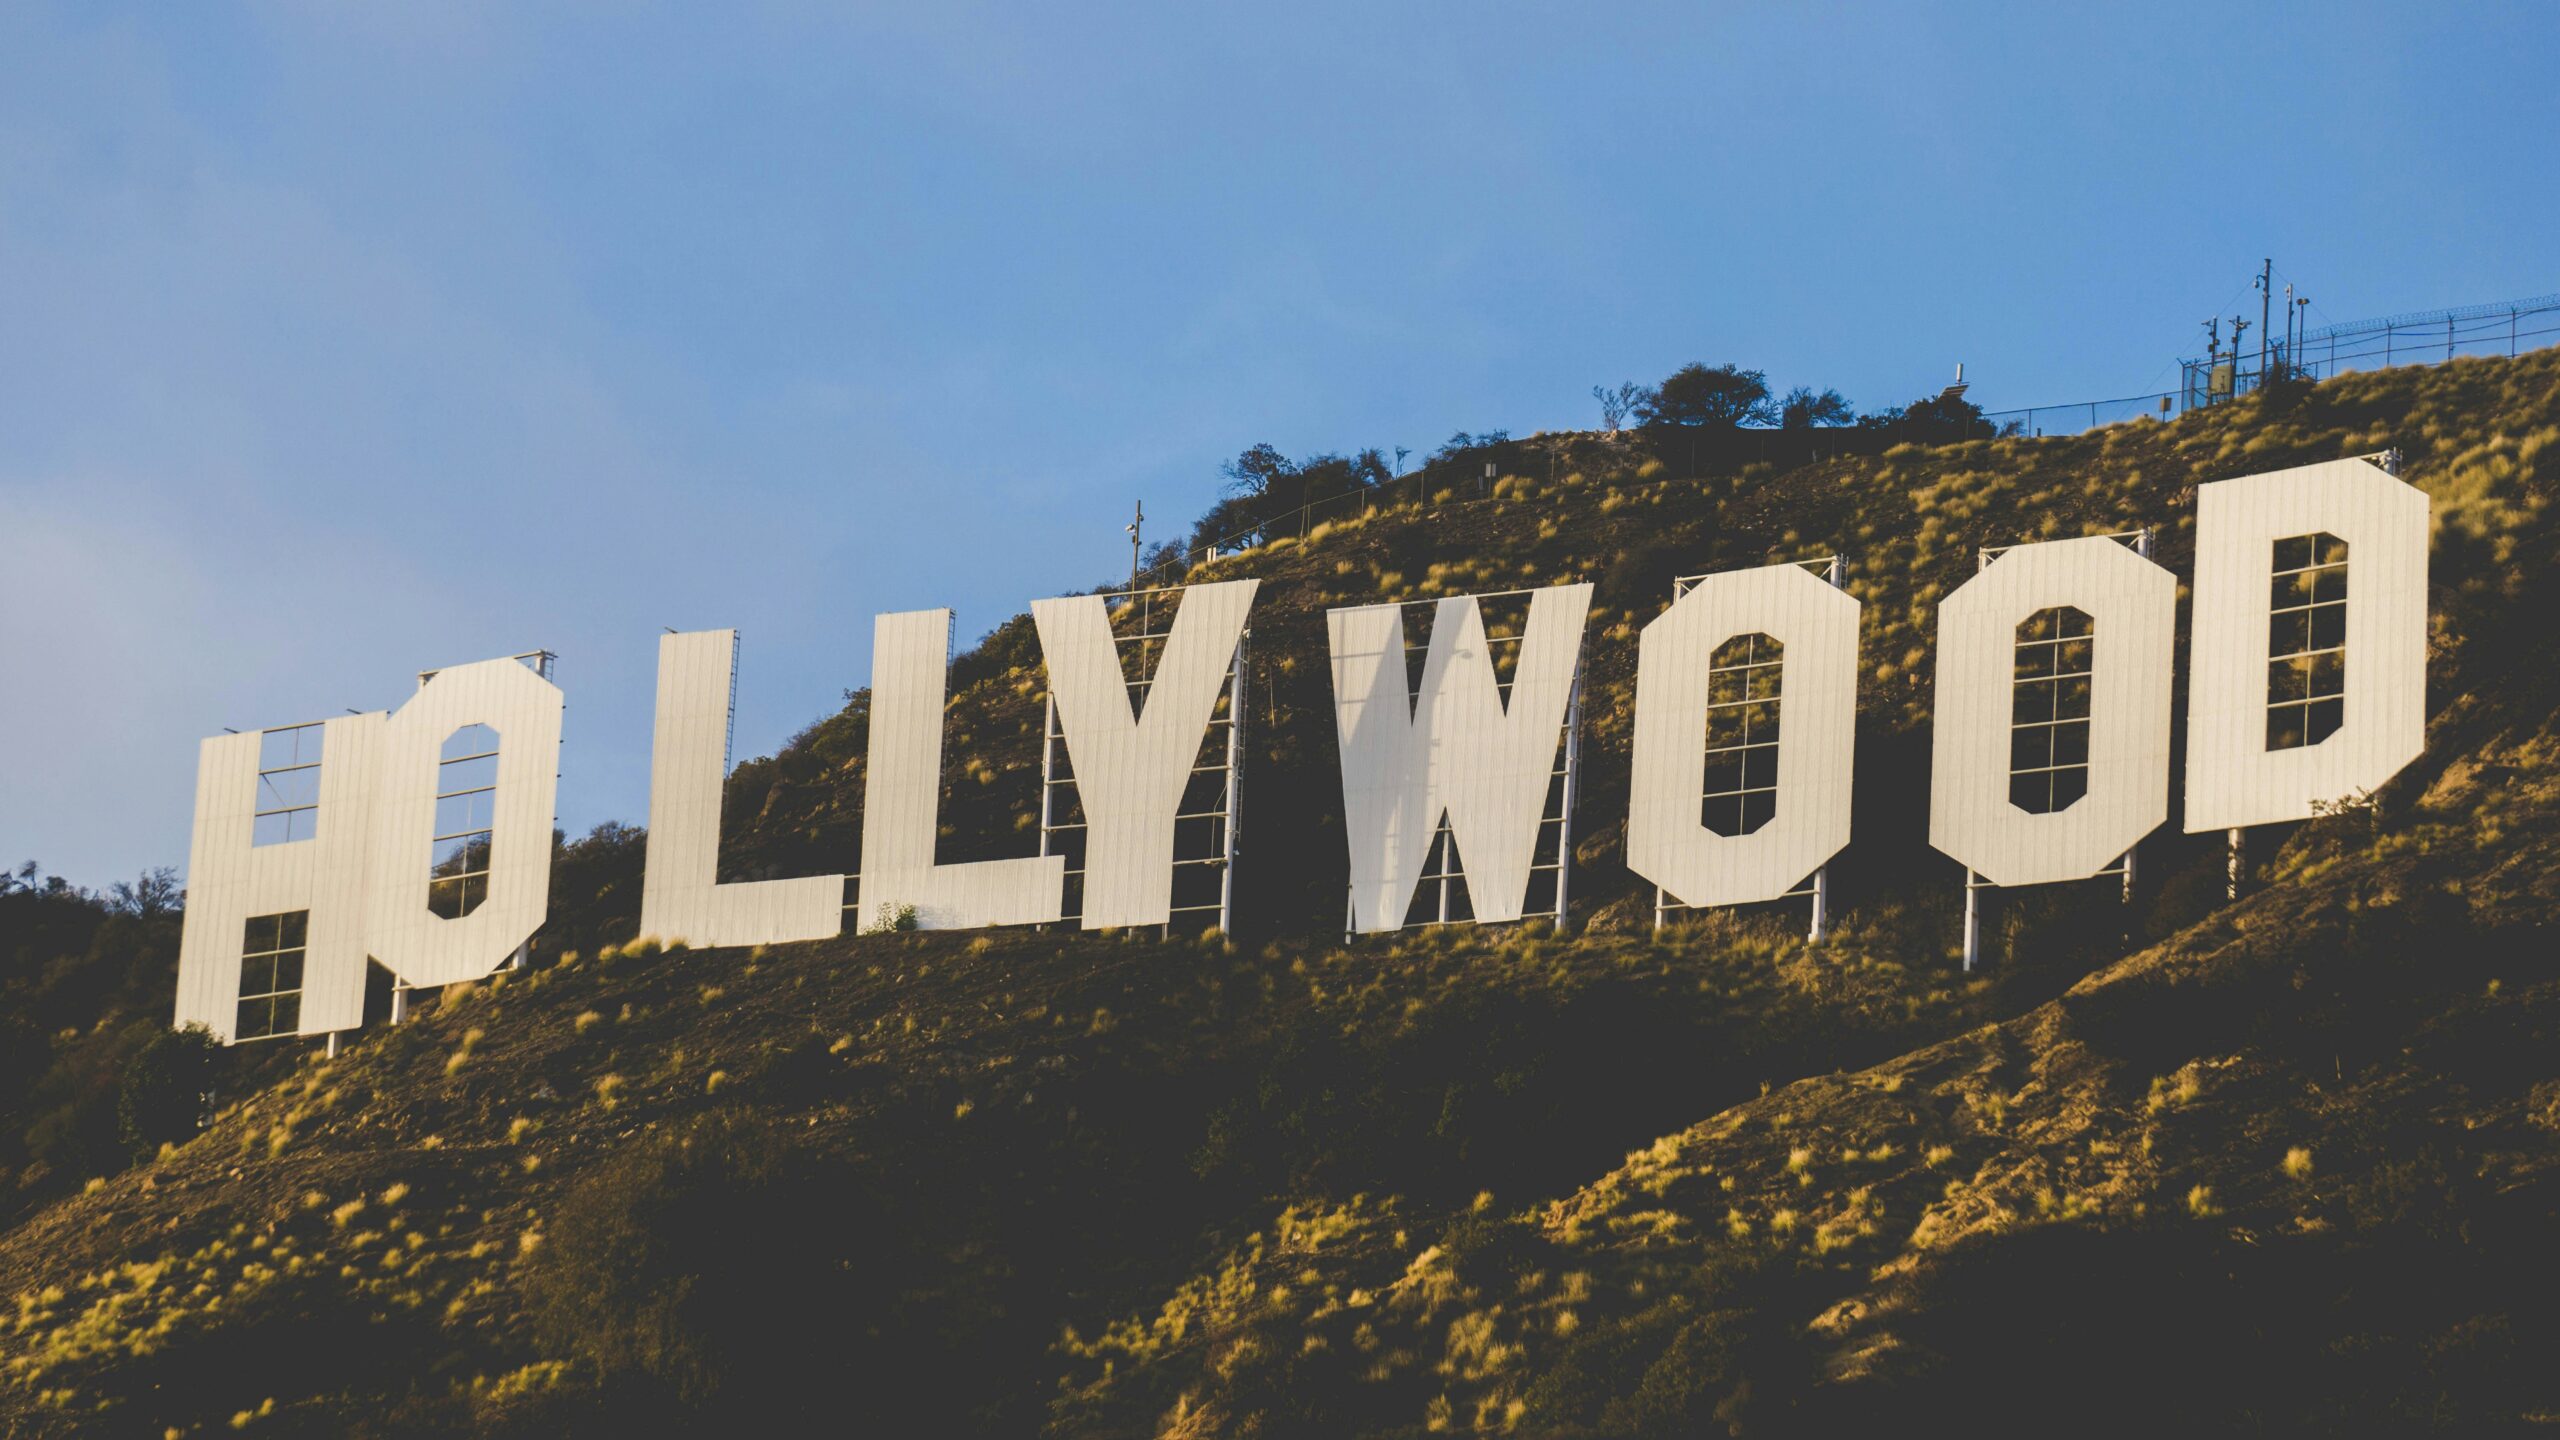 Lights, Camera, Action: Hollywood’s Educational Script for Students